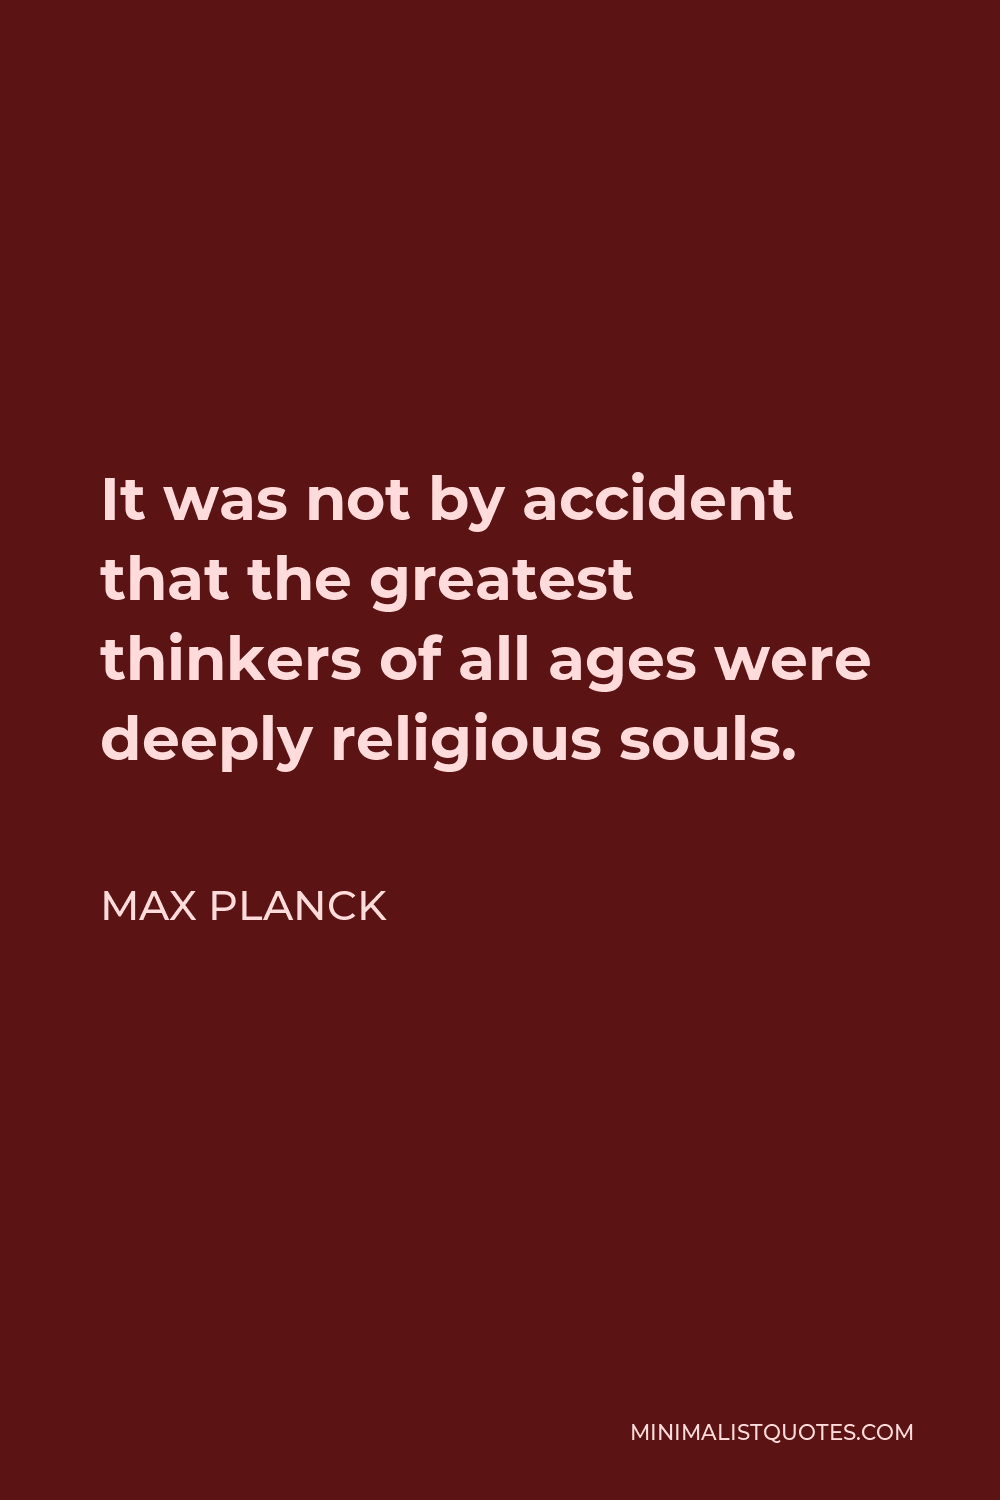 Max Planck Quote - It was not by accident that the greatest thinkers of all ages were deeply religious souls.